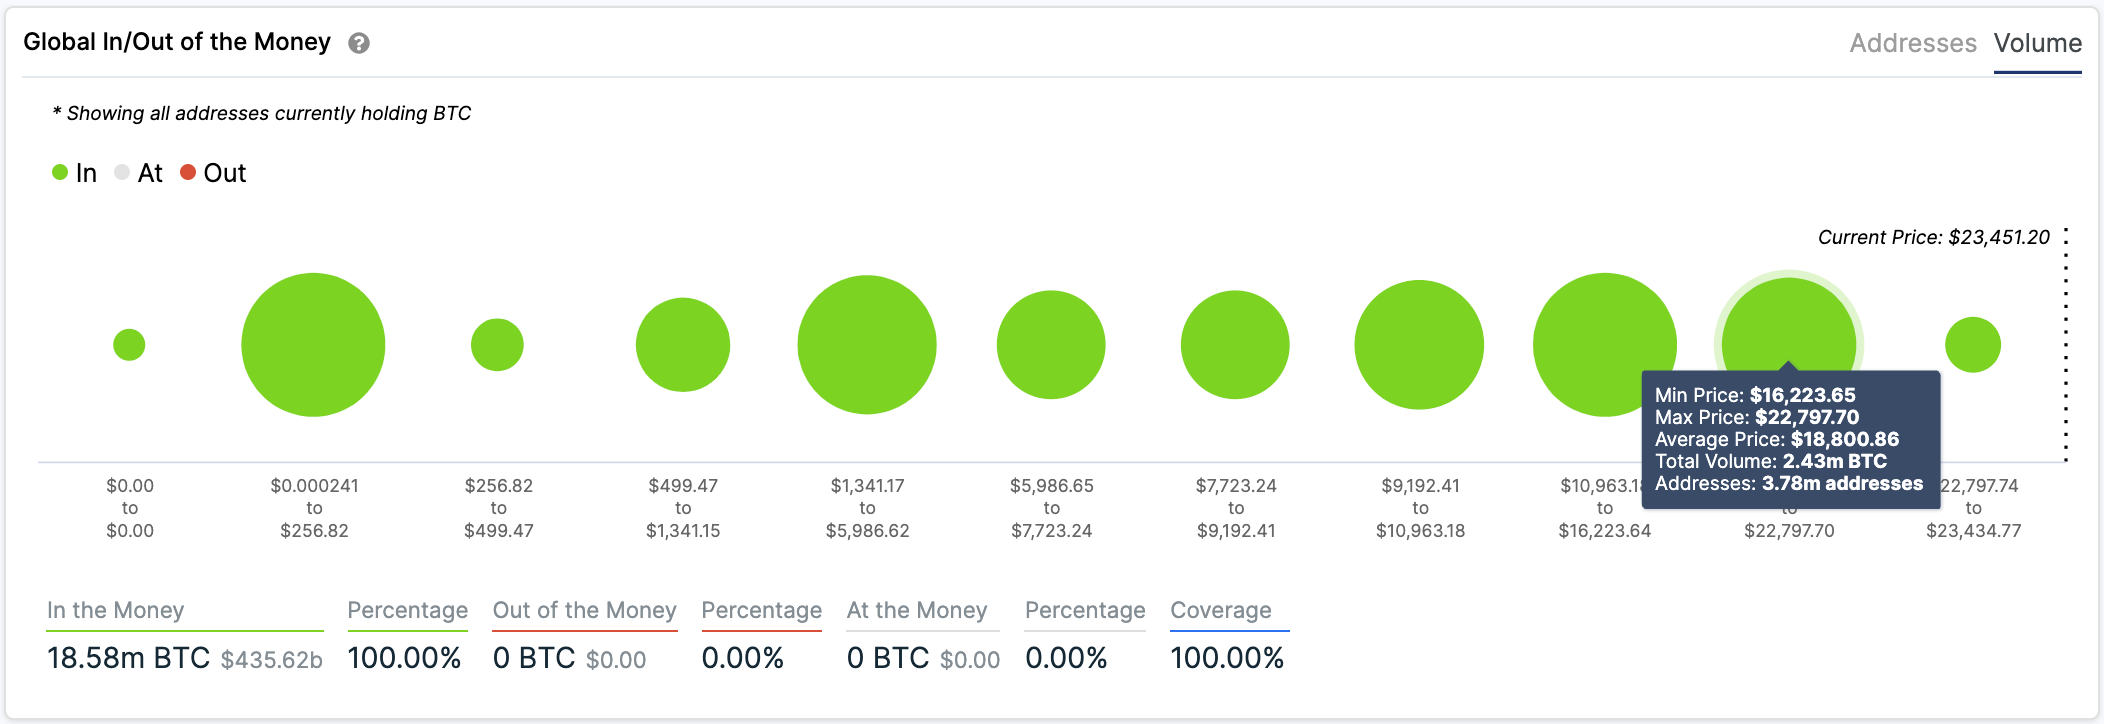 BTC, Global In/Out of the Money